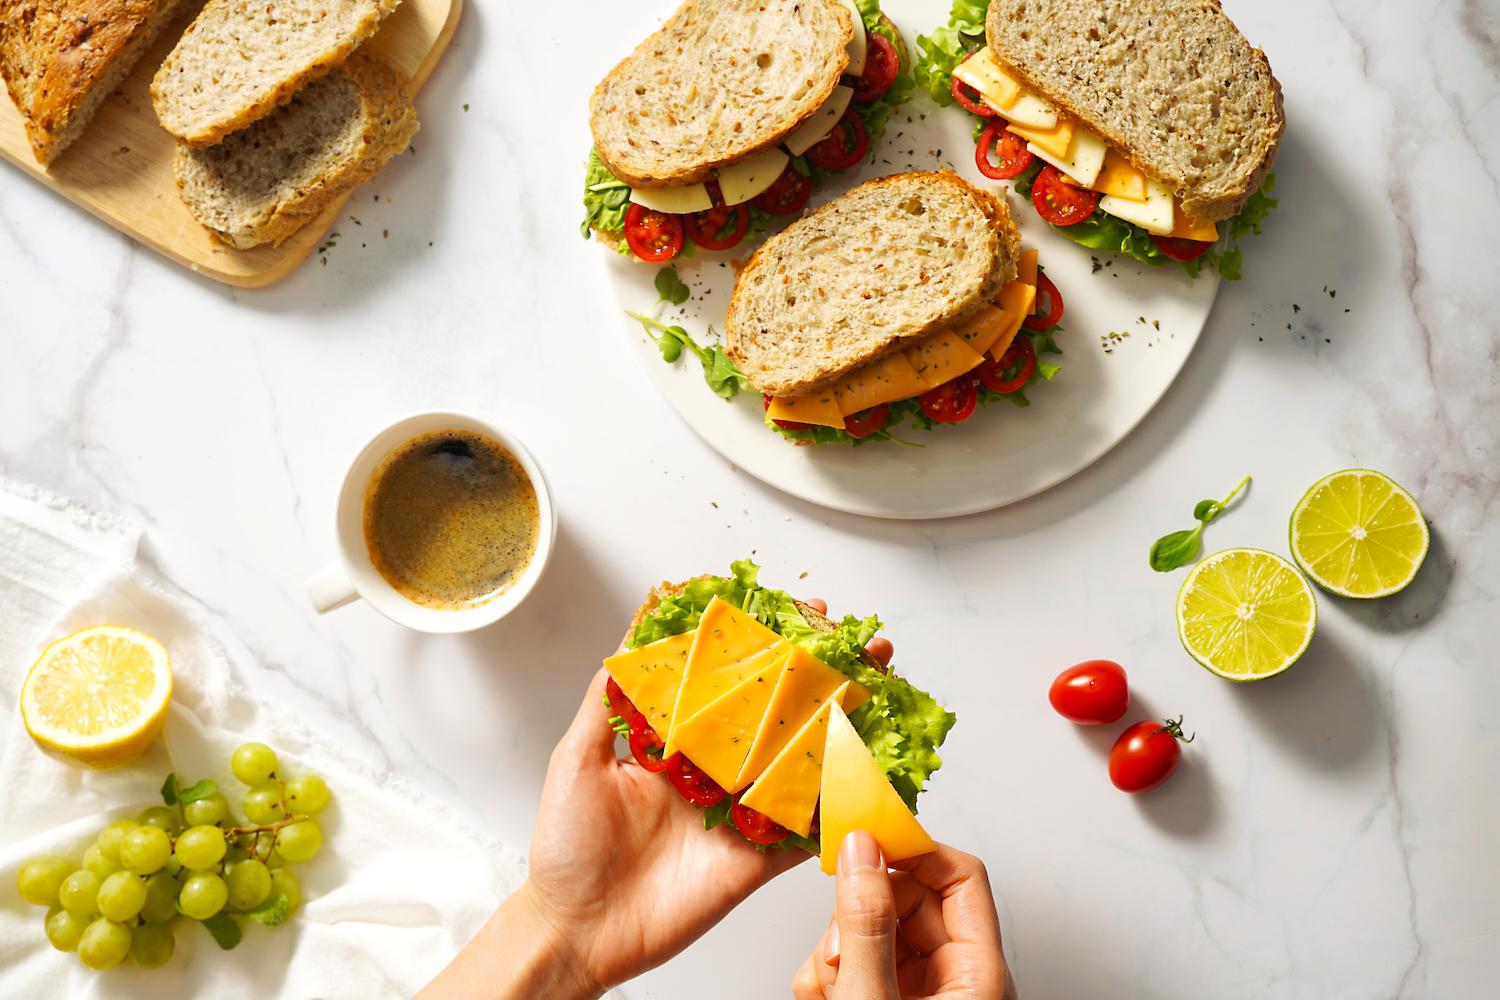 sandwiches with plant-based cheese — if everyone ate a more plant-based diet it would significantly reduce emissions even if they don't go vegan - climate solutions with potential